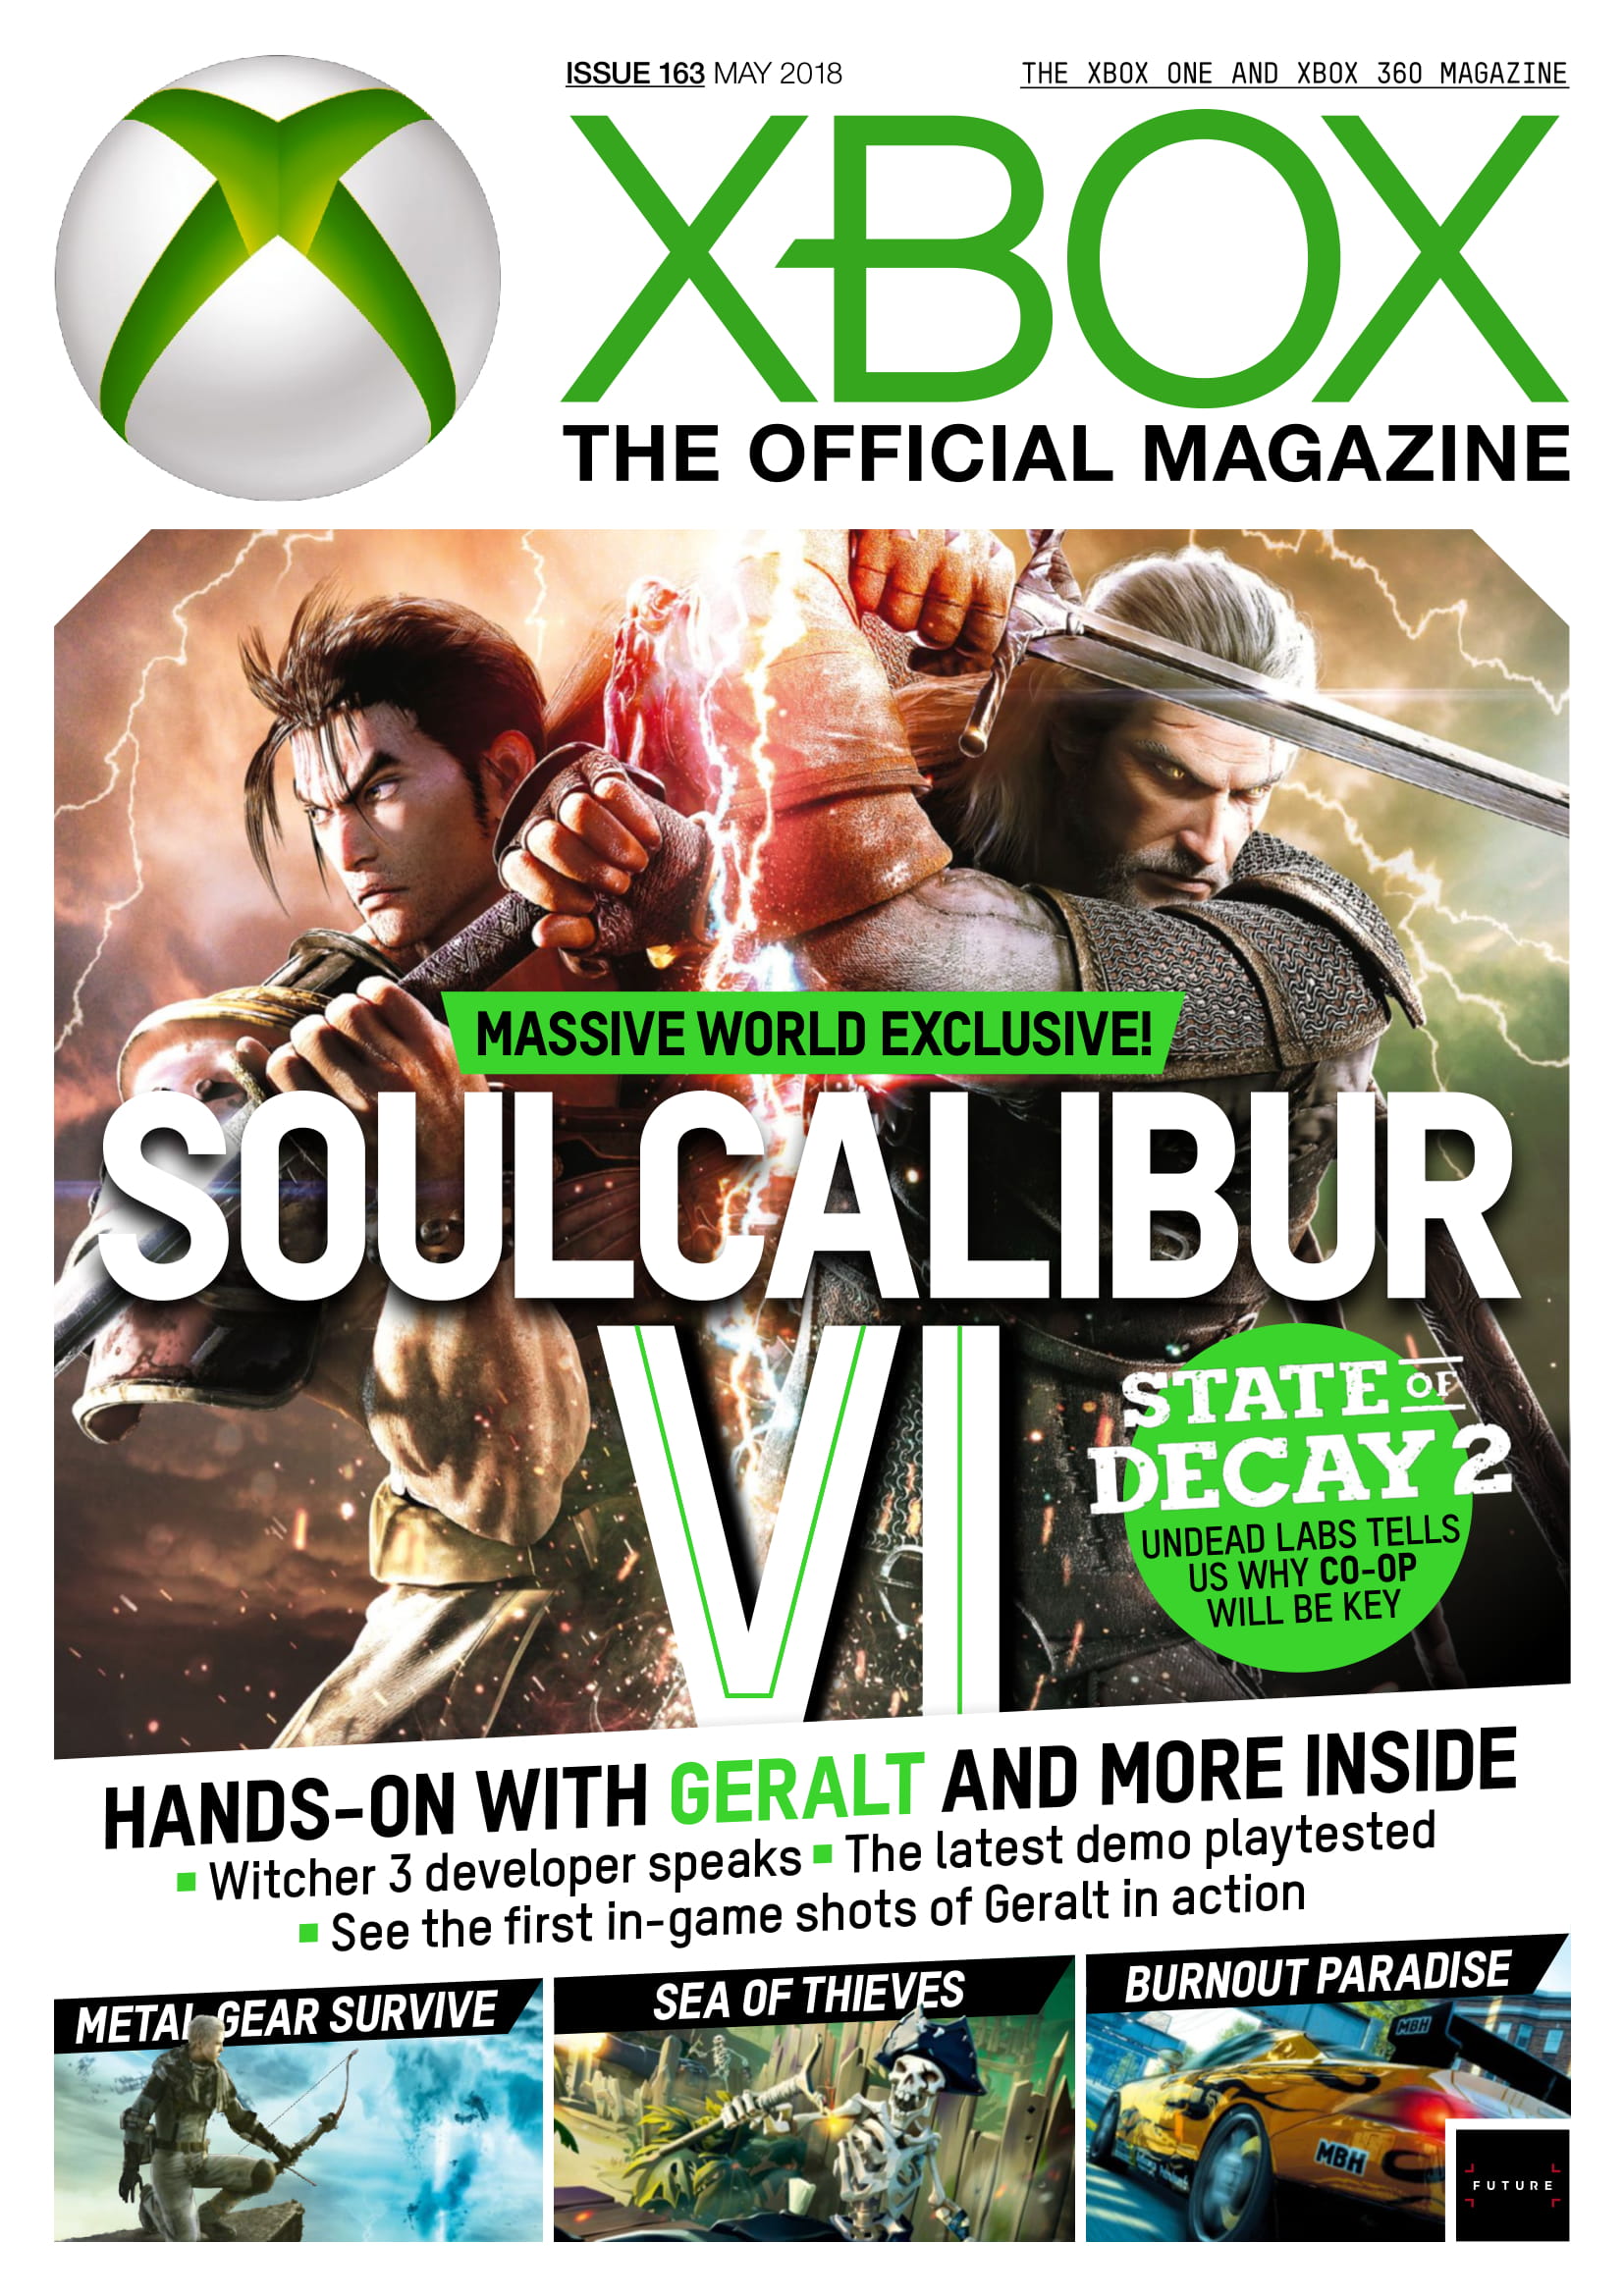 Xbox The Official Magazine - May 2018-001.jpg